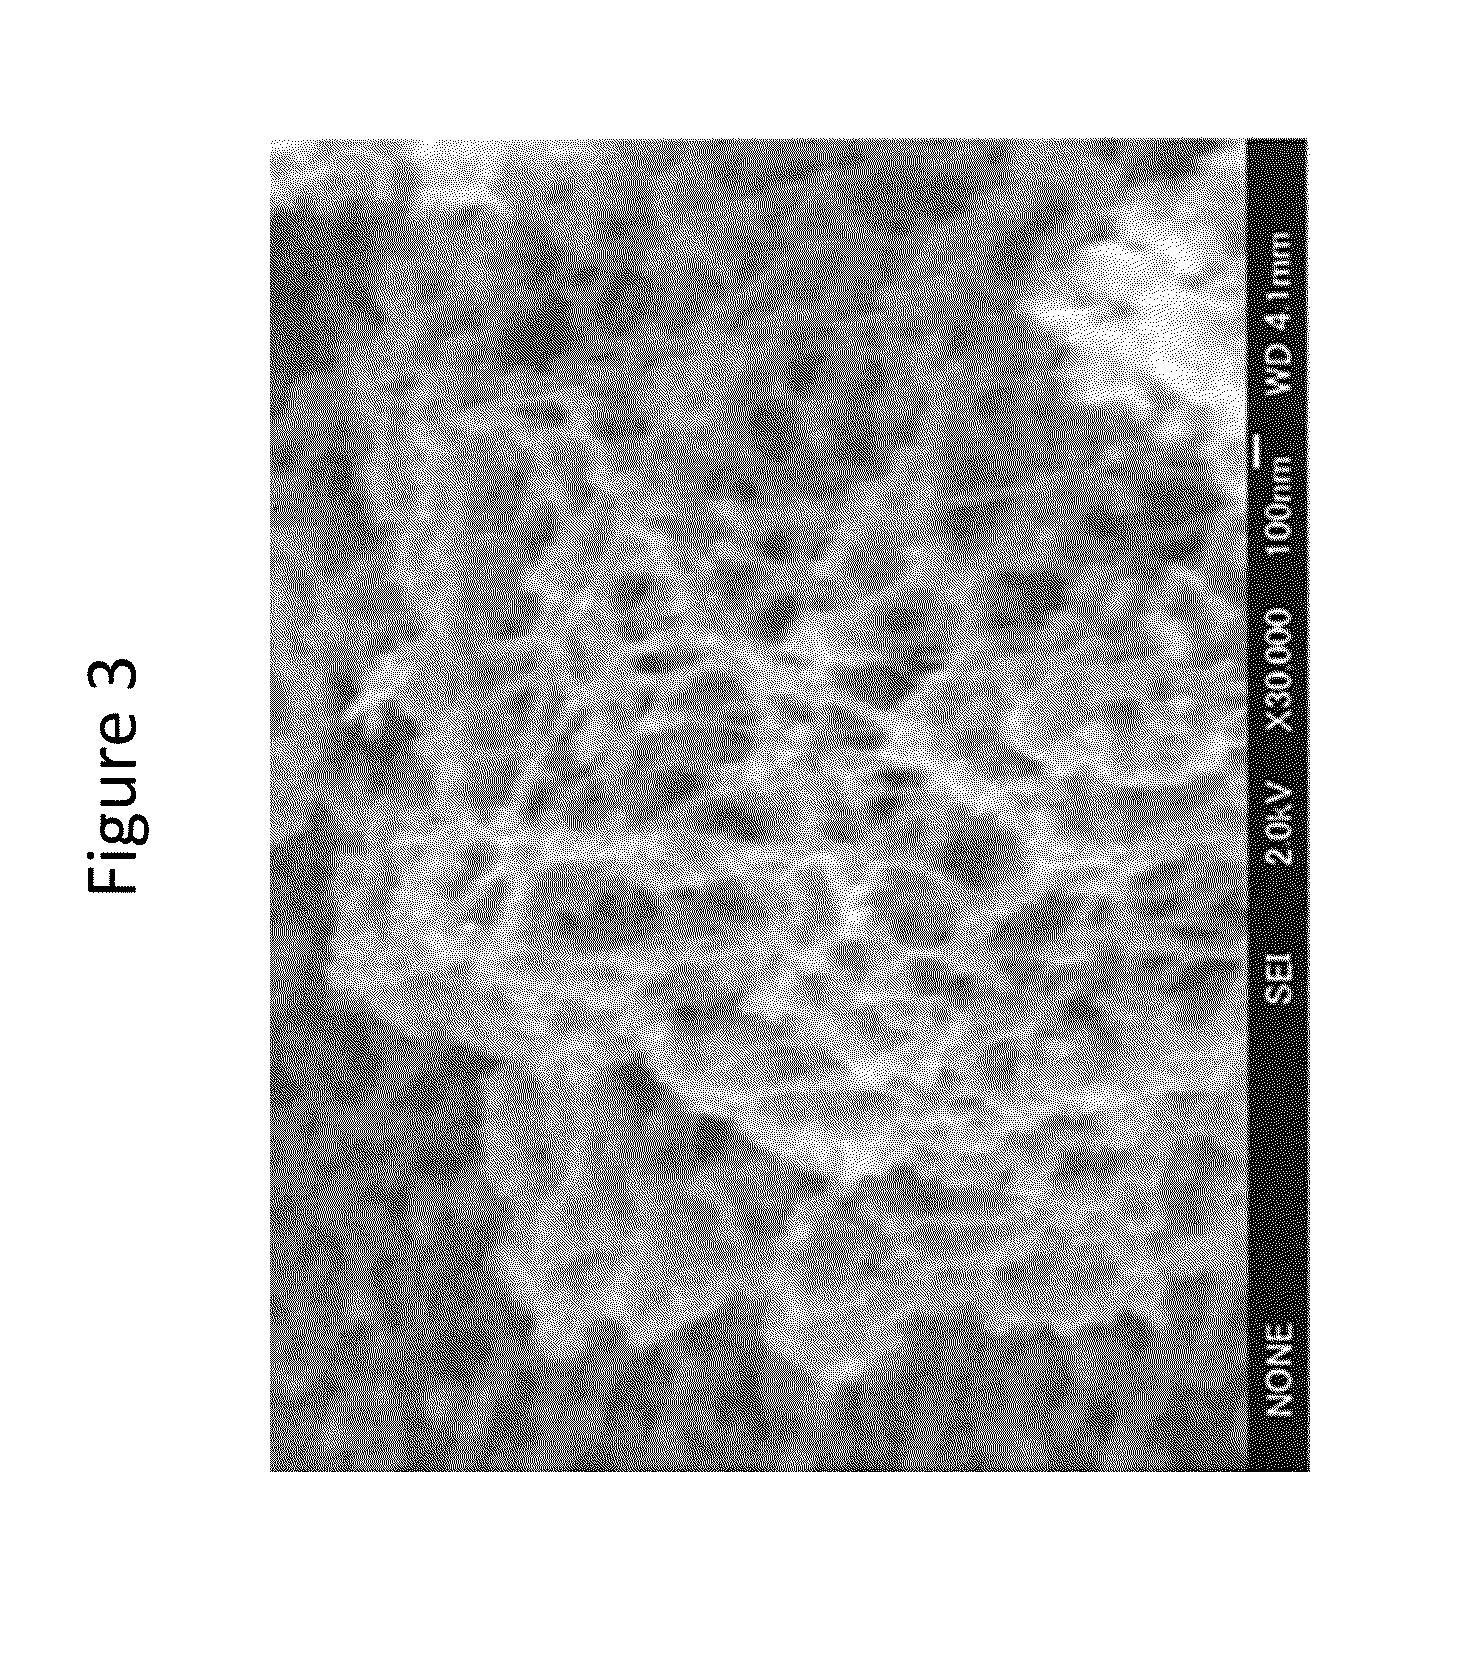 Porous carbon and method of manufacturing same